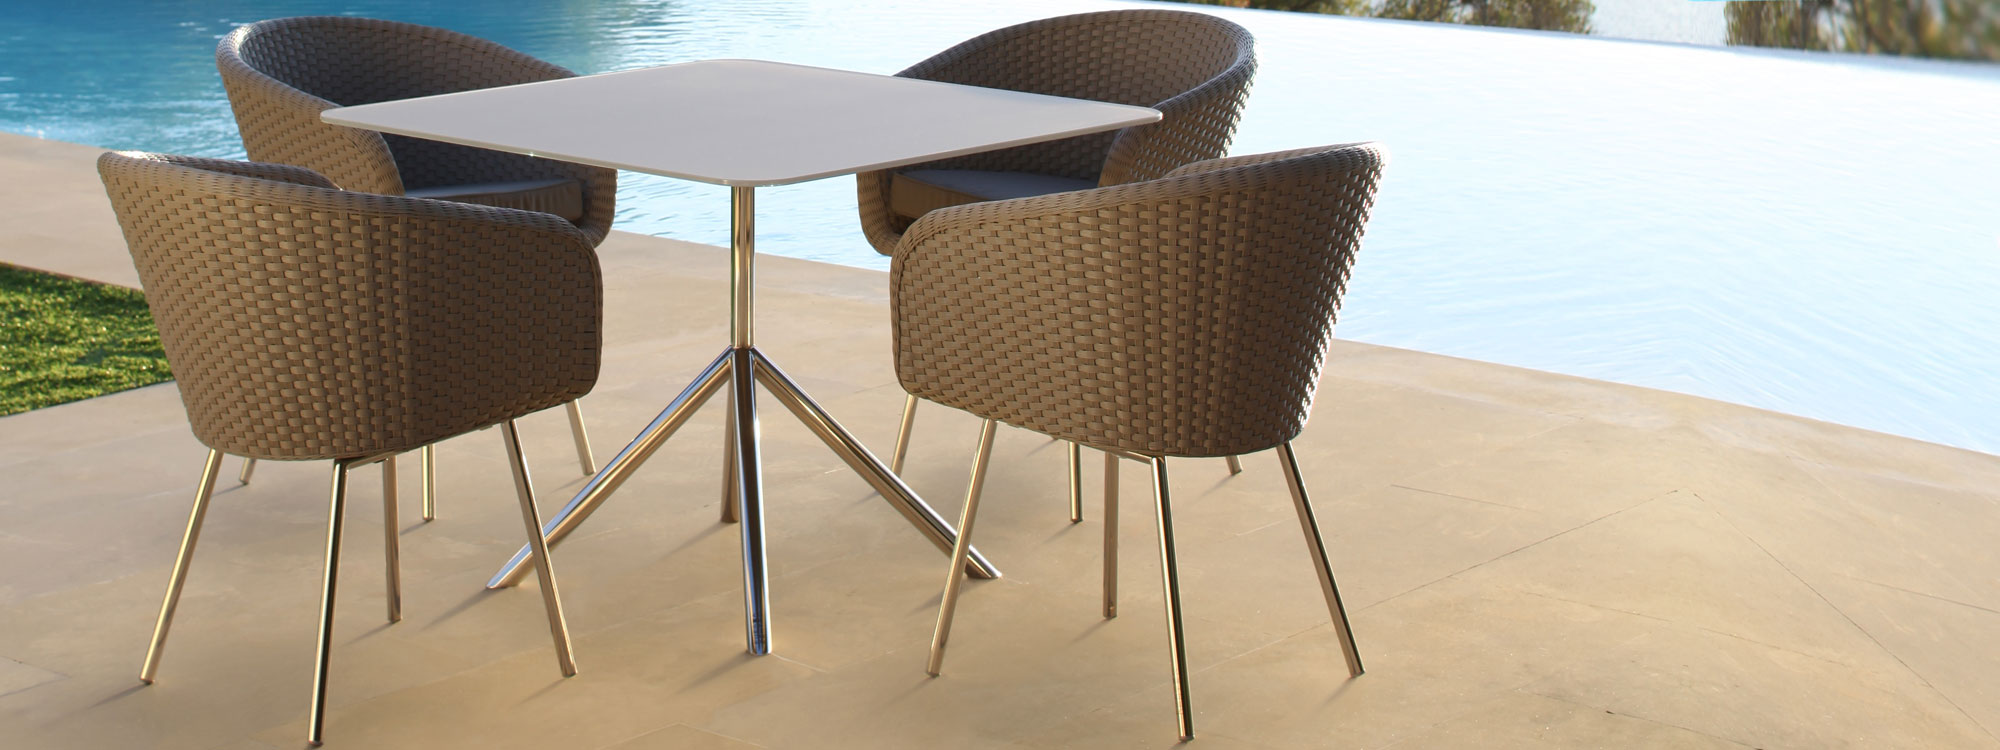 Image of Shell retro-inspired garden dining chairs and square outdoor table by FueraDentro, shown on Mediterranean poolside at early evening